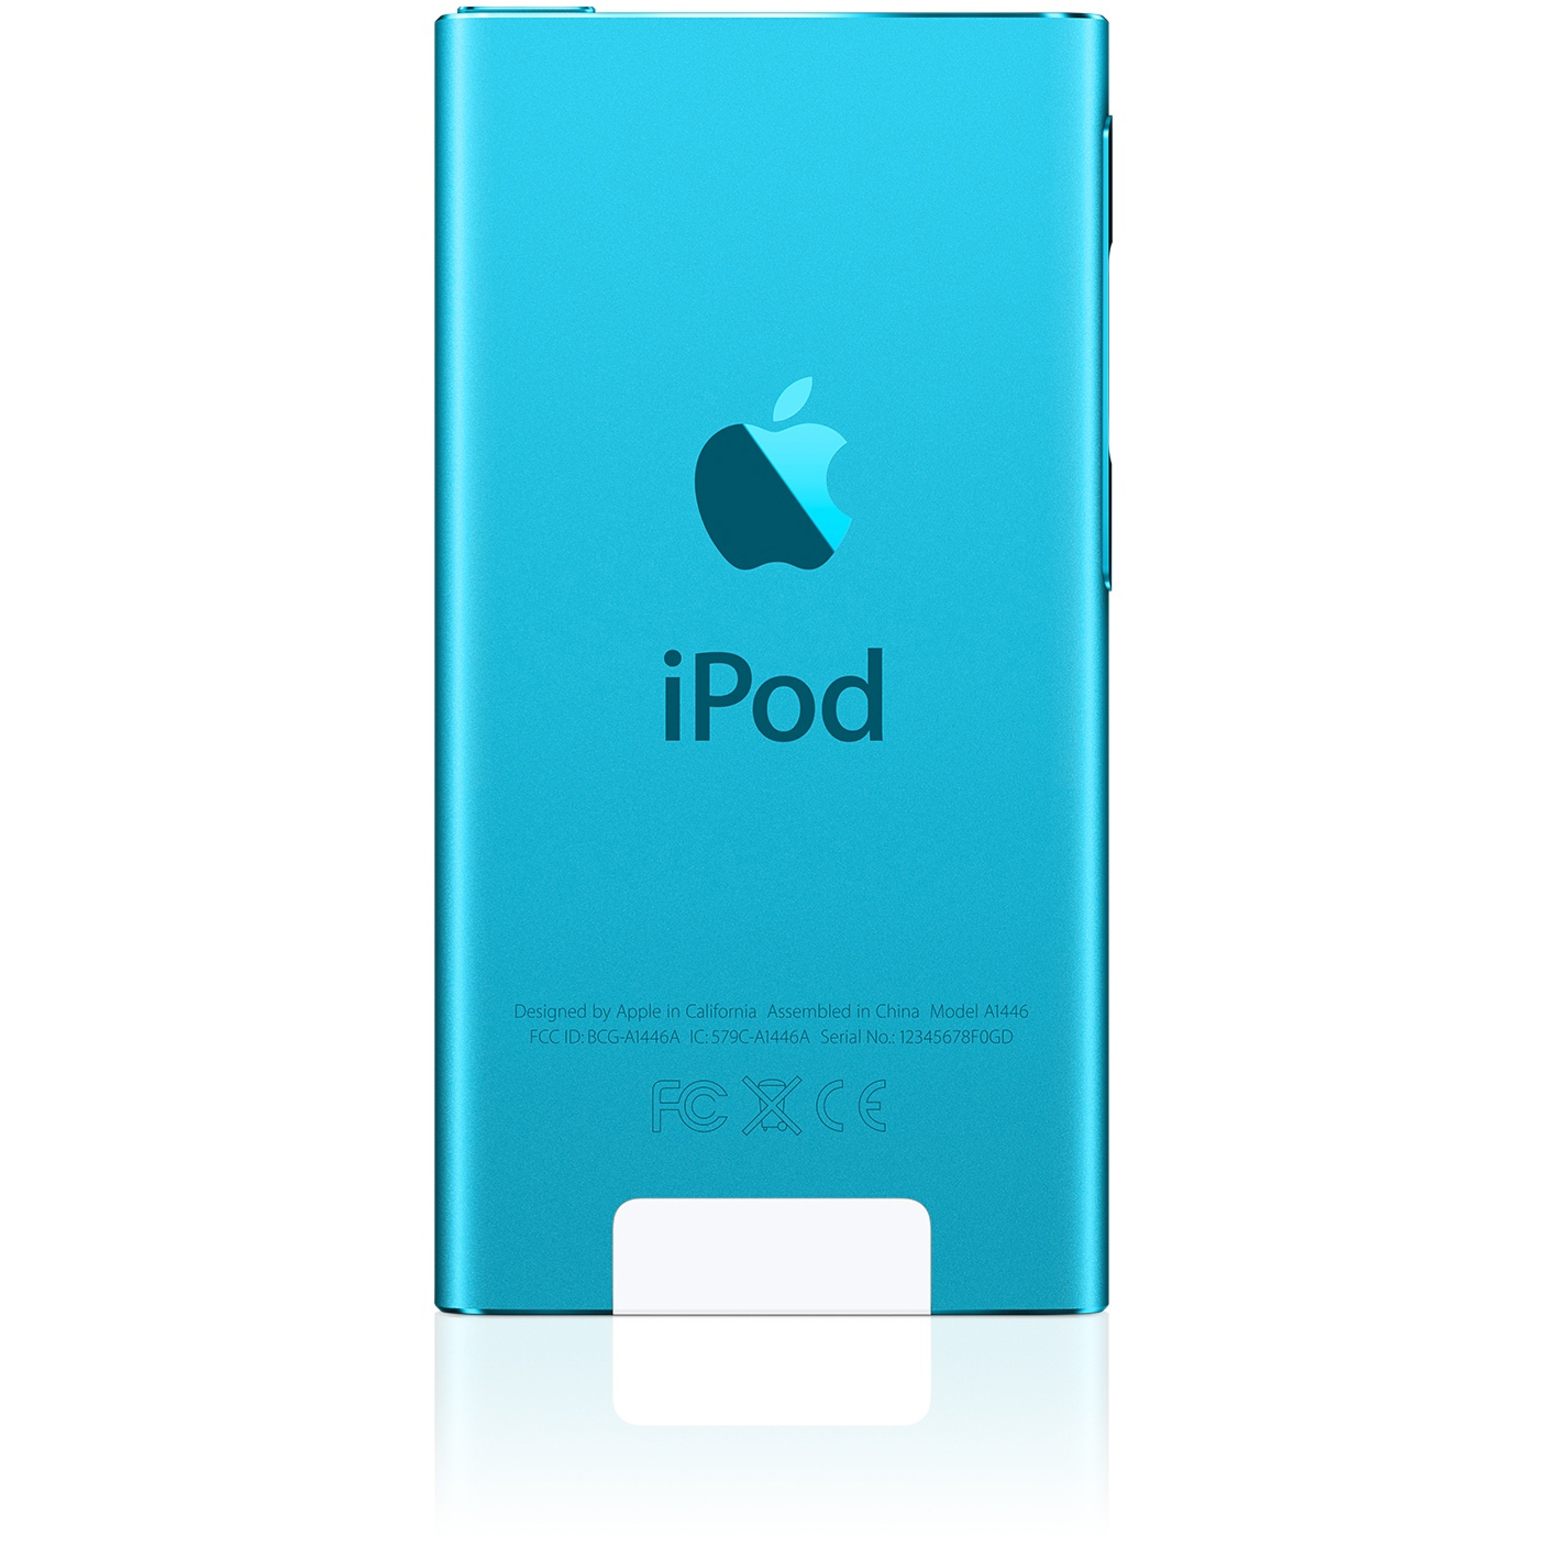 Apple iPod nano 7G 16GB MP3/Video Player with LCD Display & Touchscreen, Blue - image 2 of 3